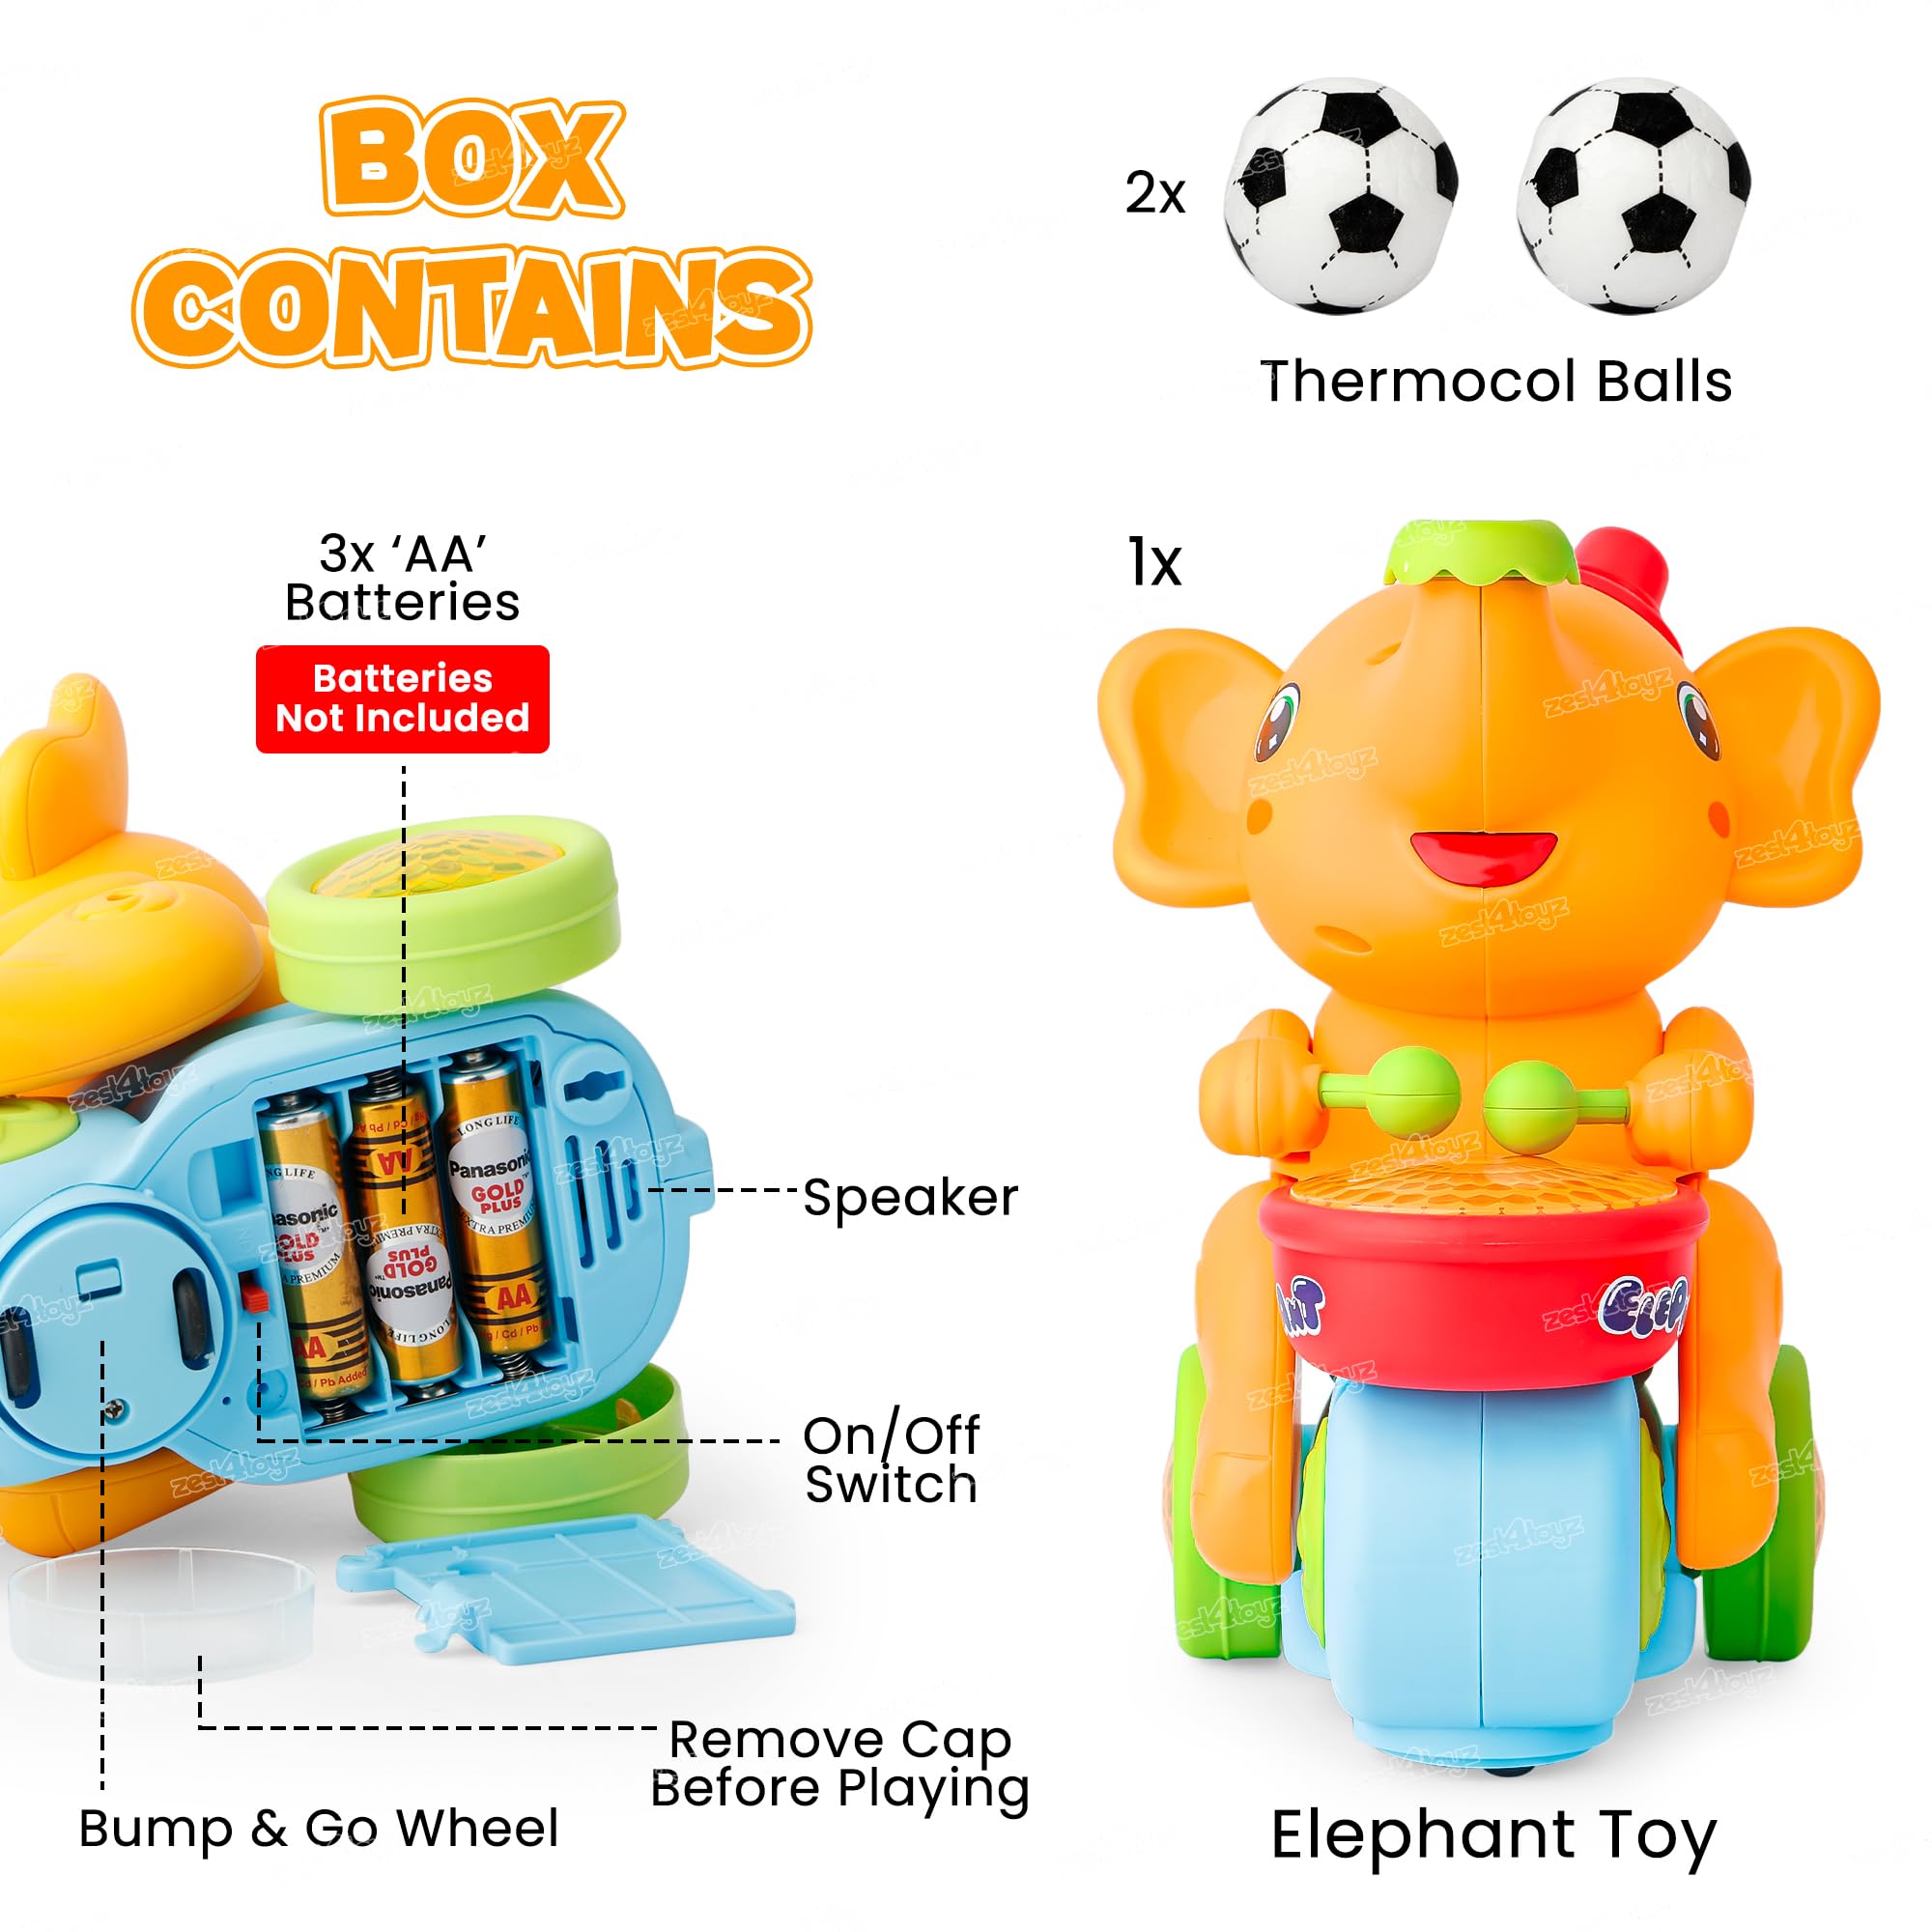 Zest 4 Toyz Musical Walking Elephant Drummer Toy with Flashing Light & Sound Toy for Kids Beating Drum Blowing Ball Toy - Yellow